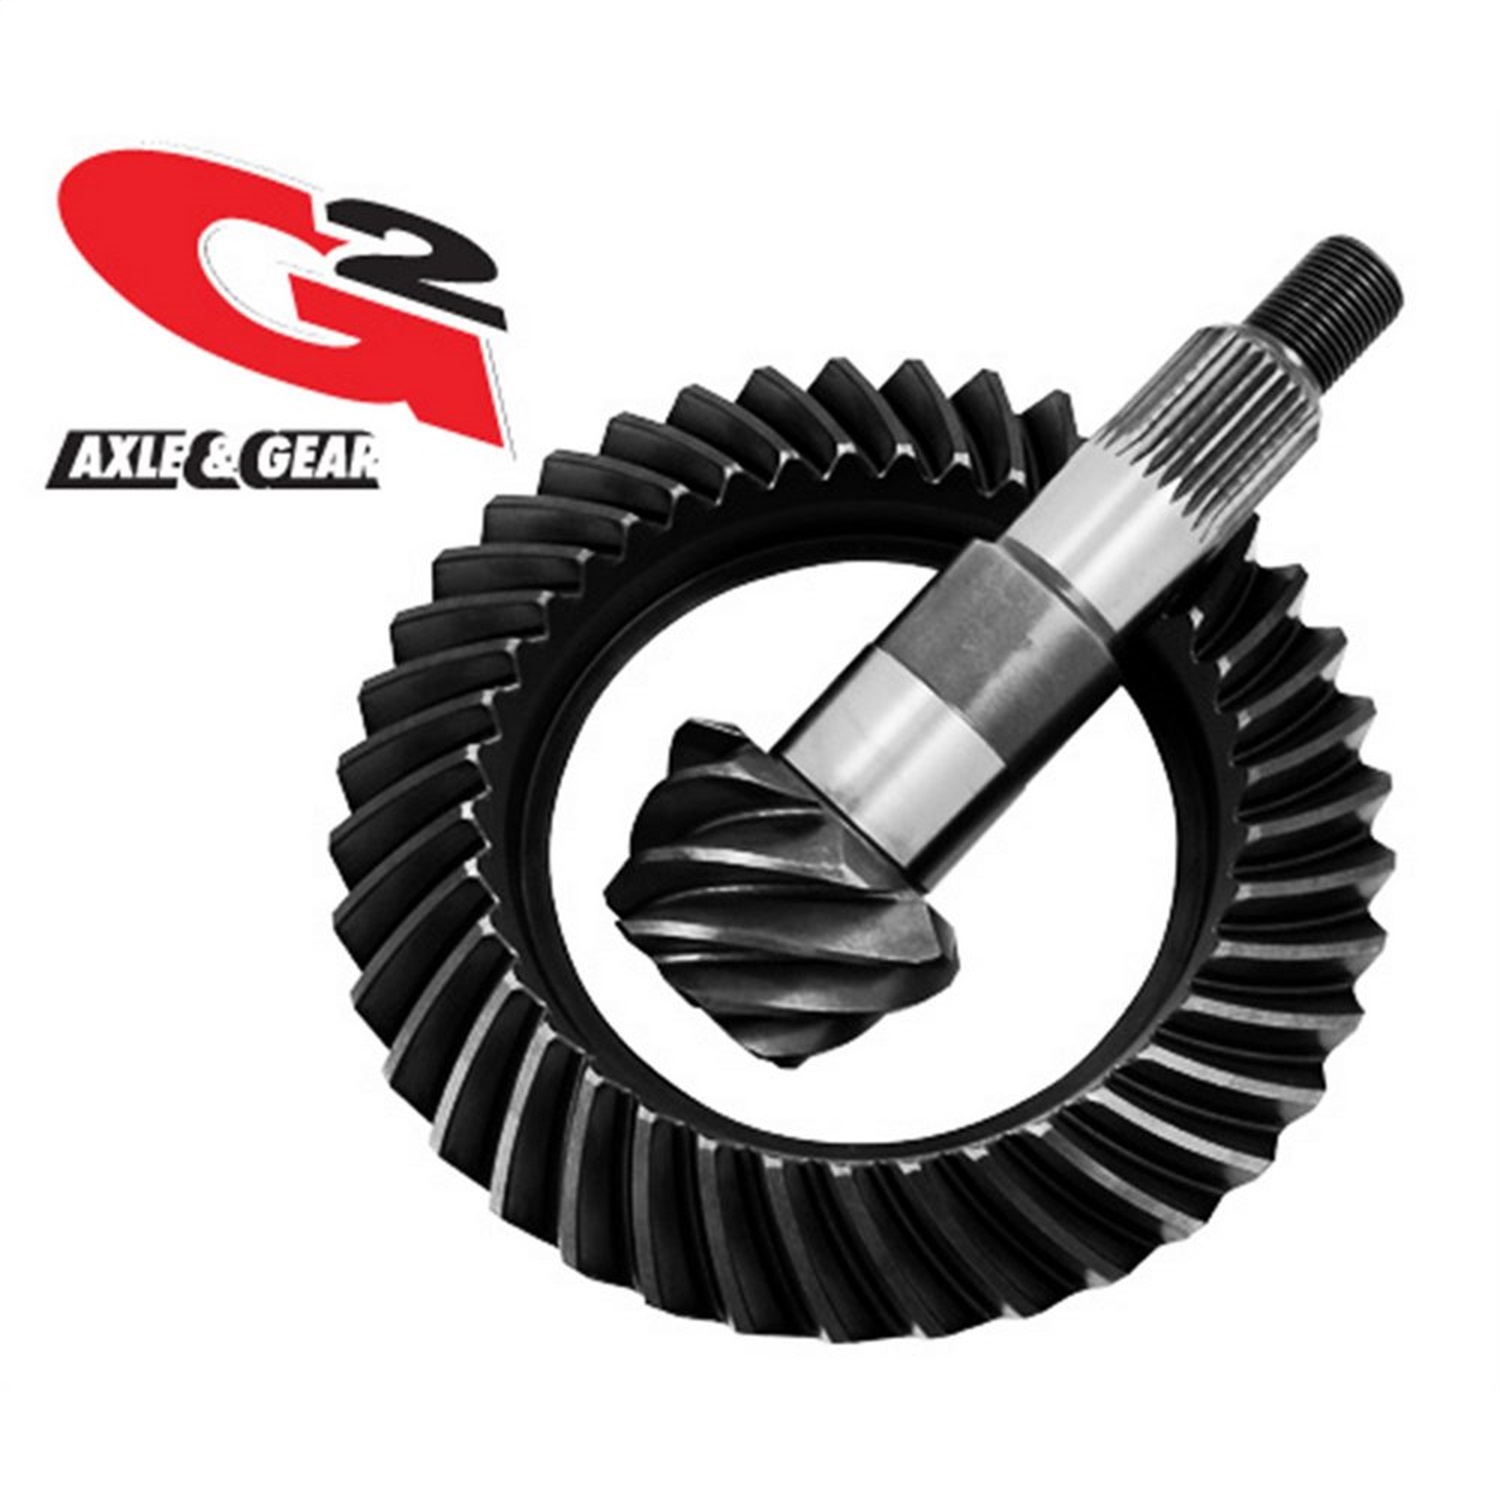 G2 Axle and Gear G2 Axle and Gear 2-2013-488 Ring and Pinion